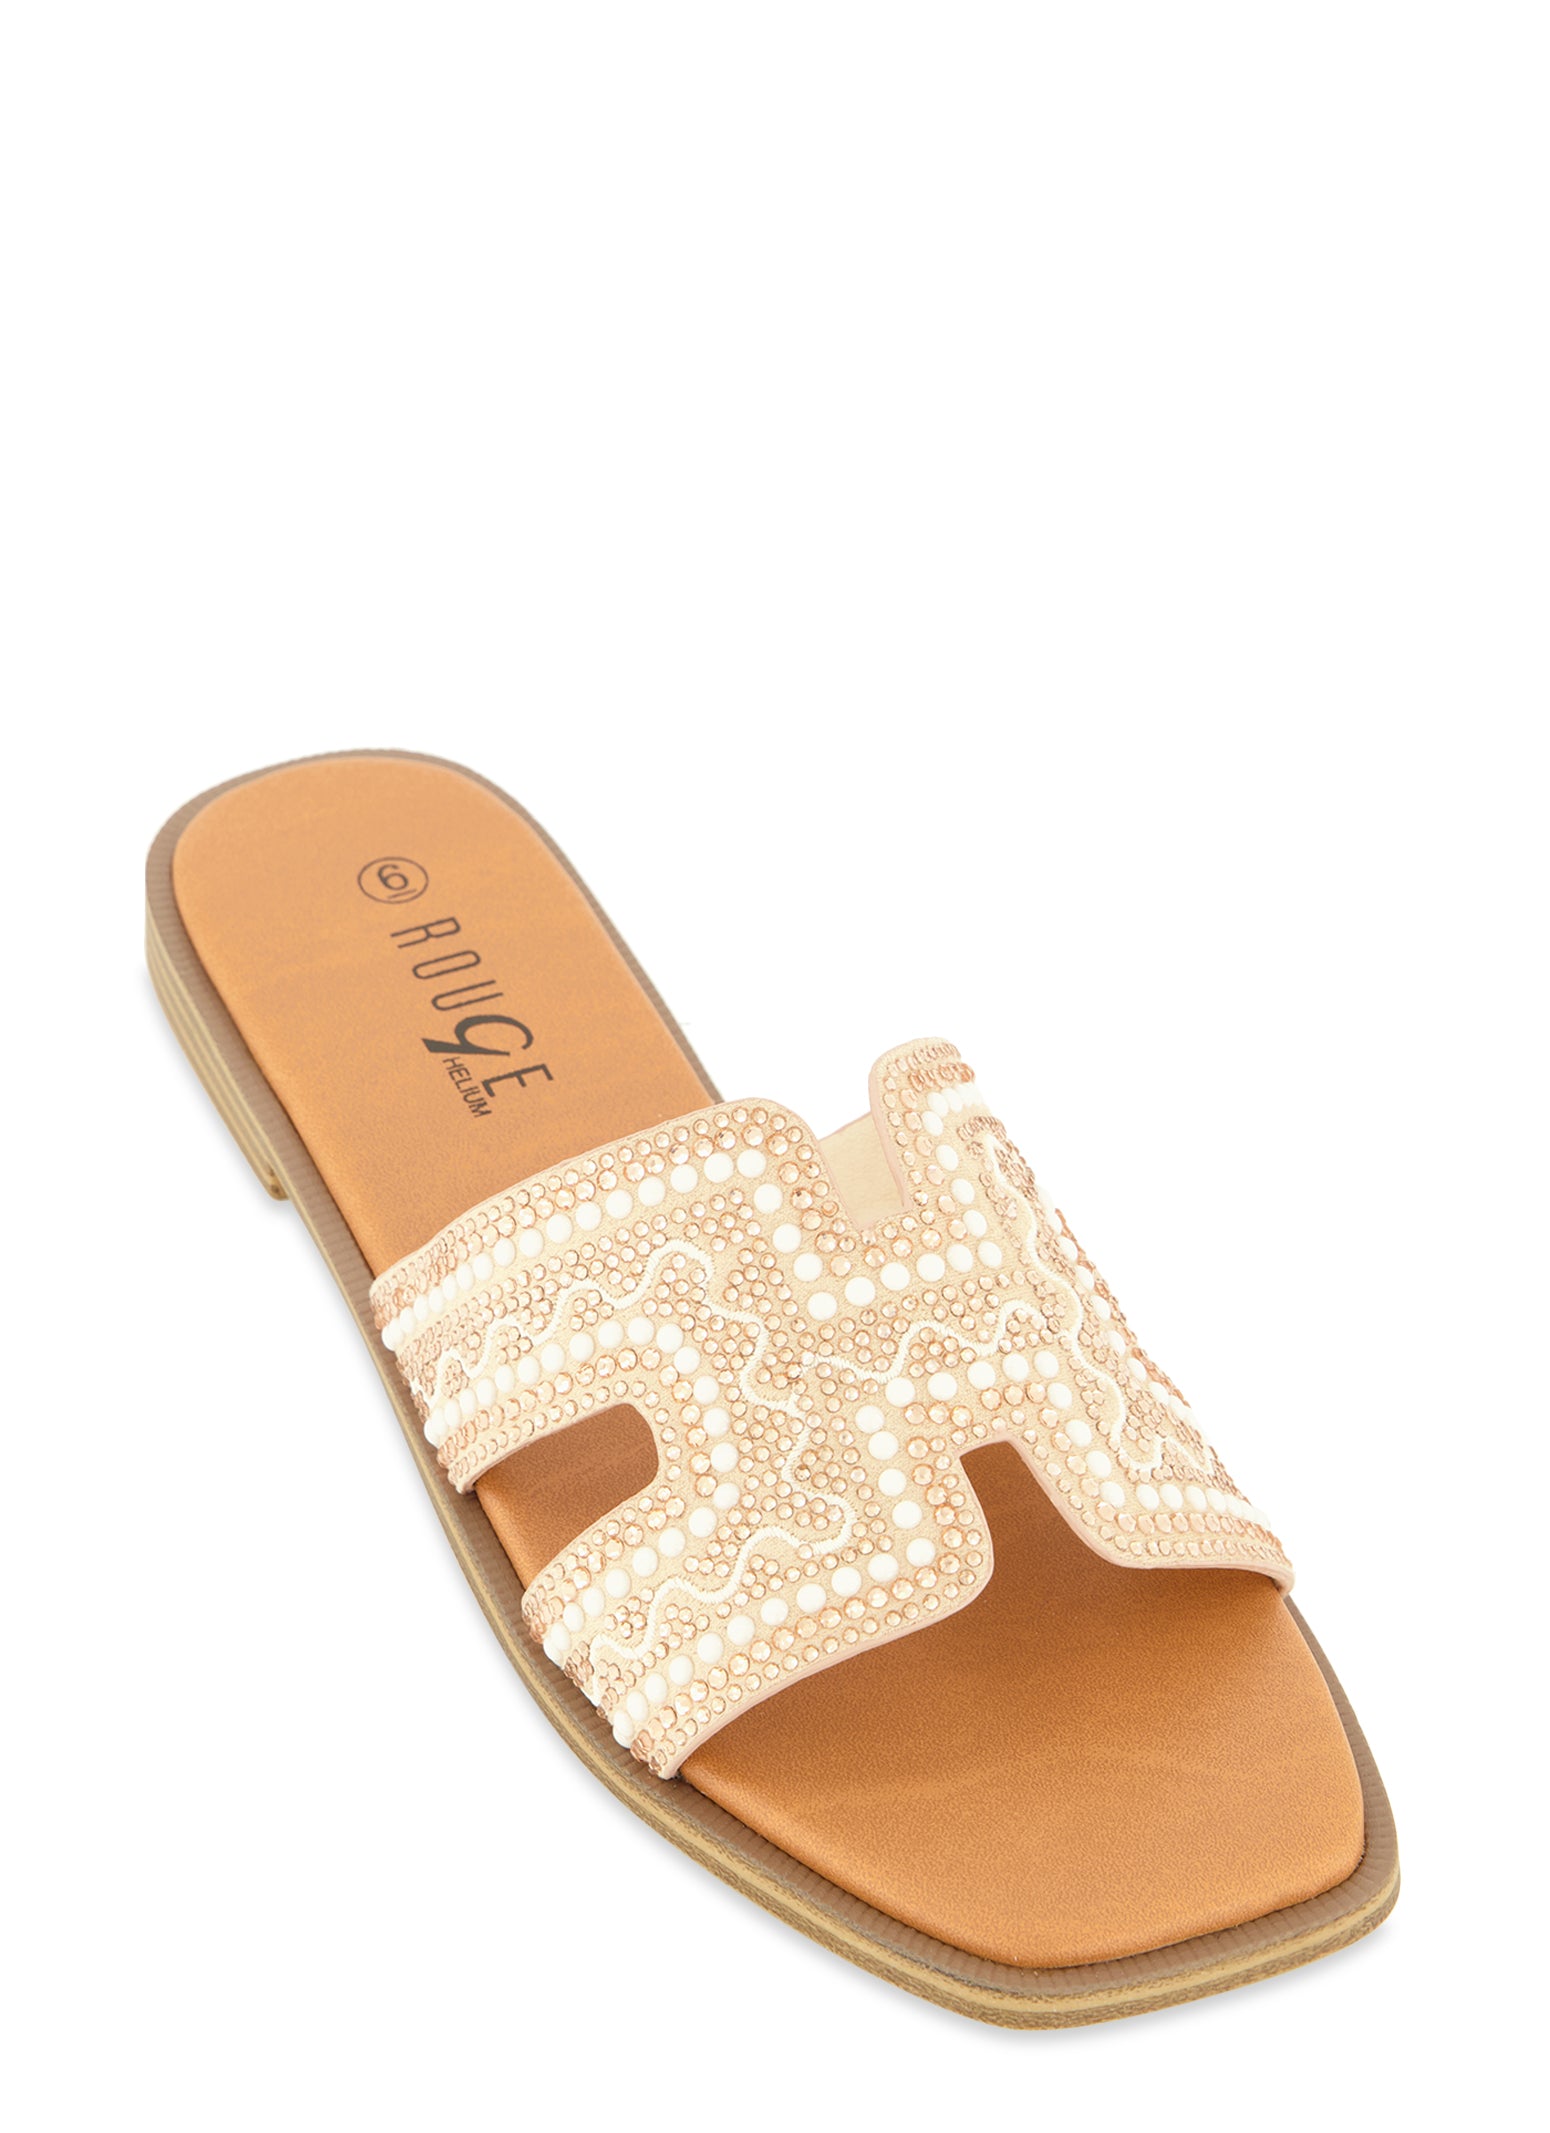 Womens Faux Pearl Cut Out Band Slide Sandals,